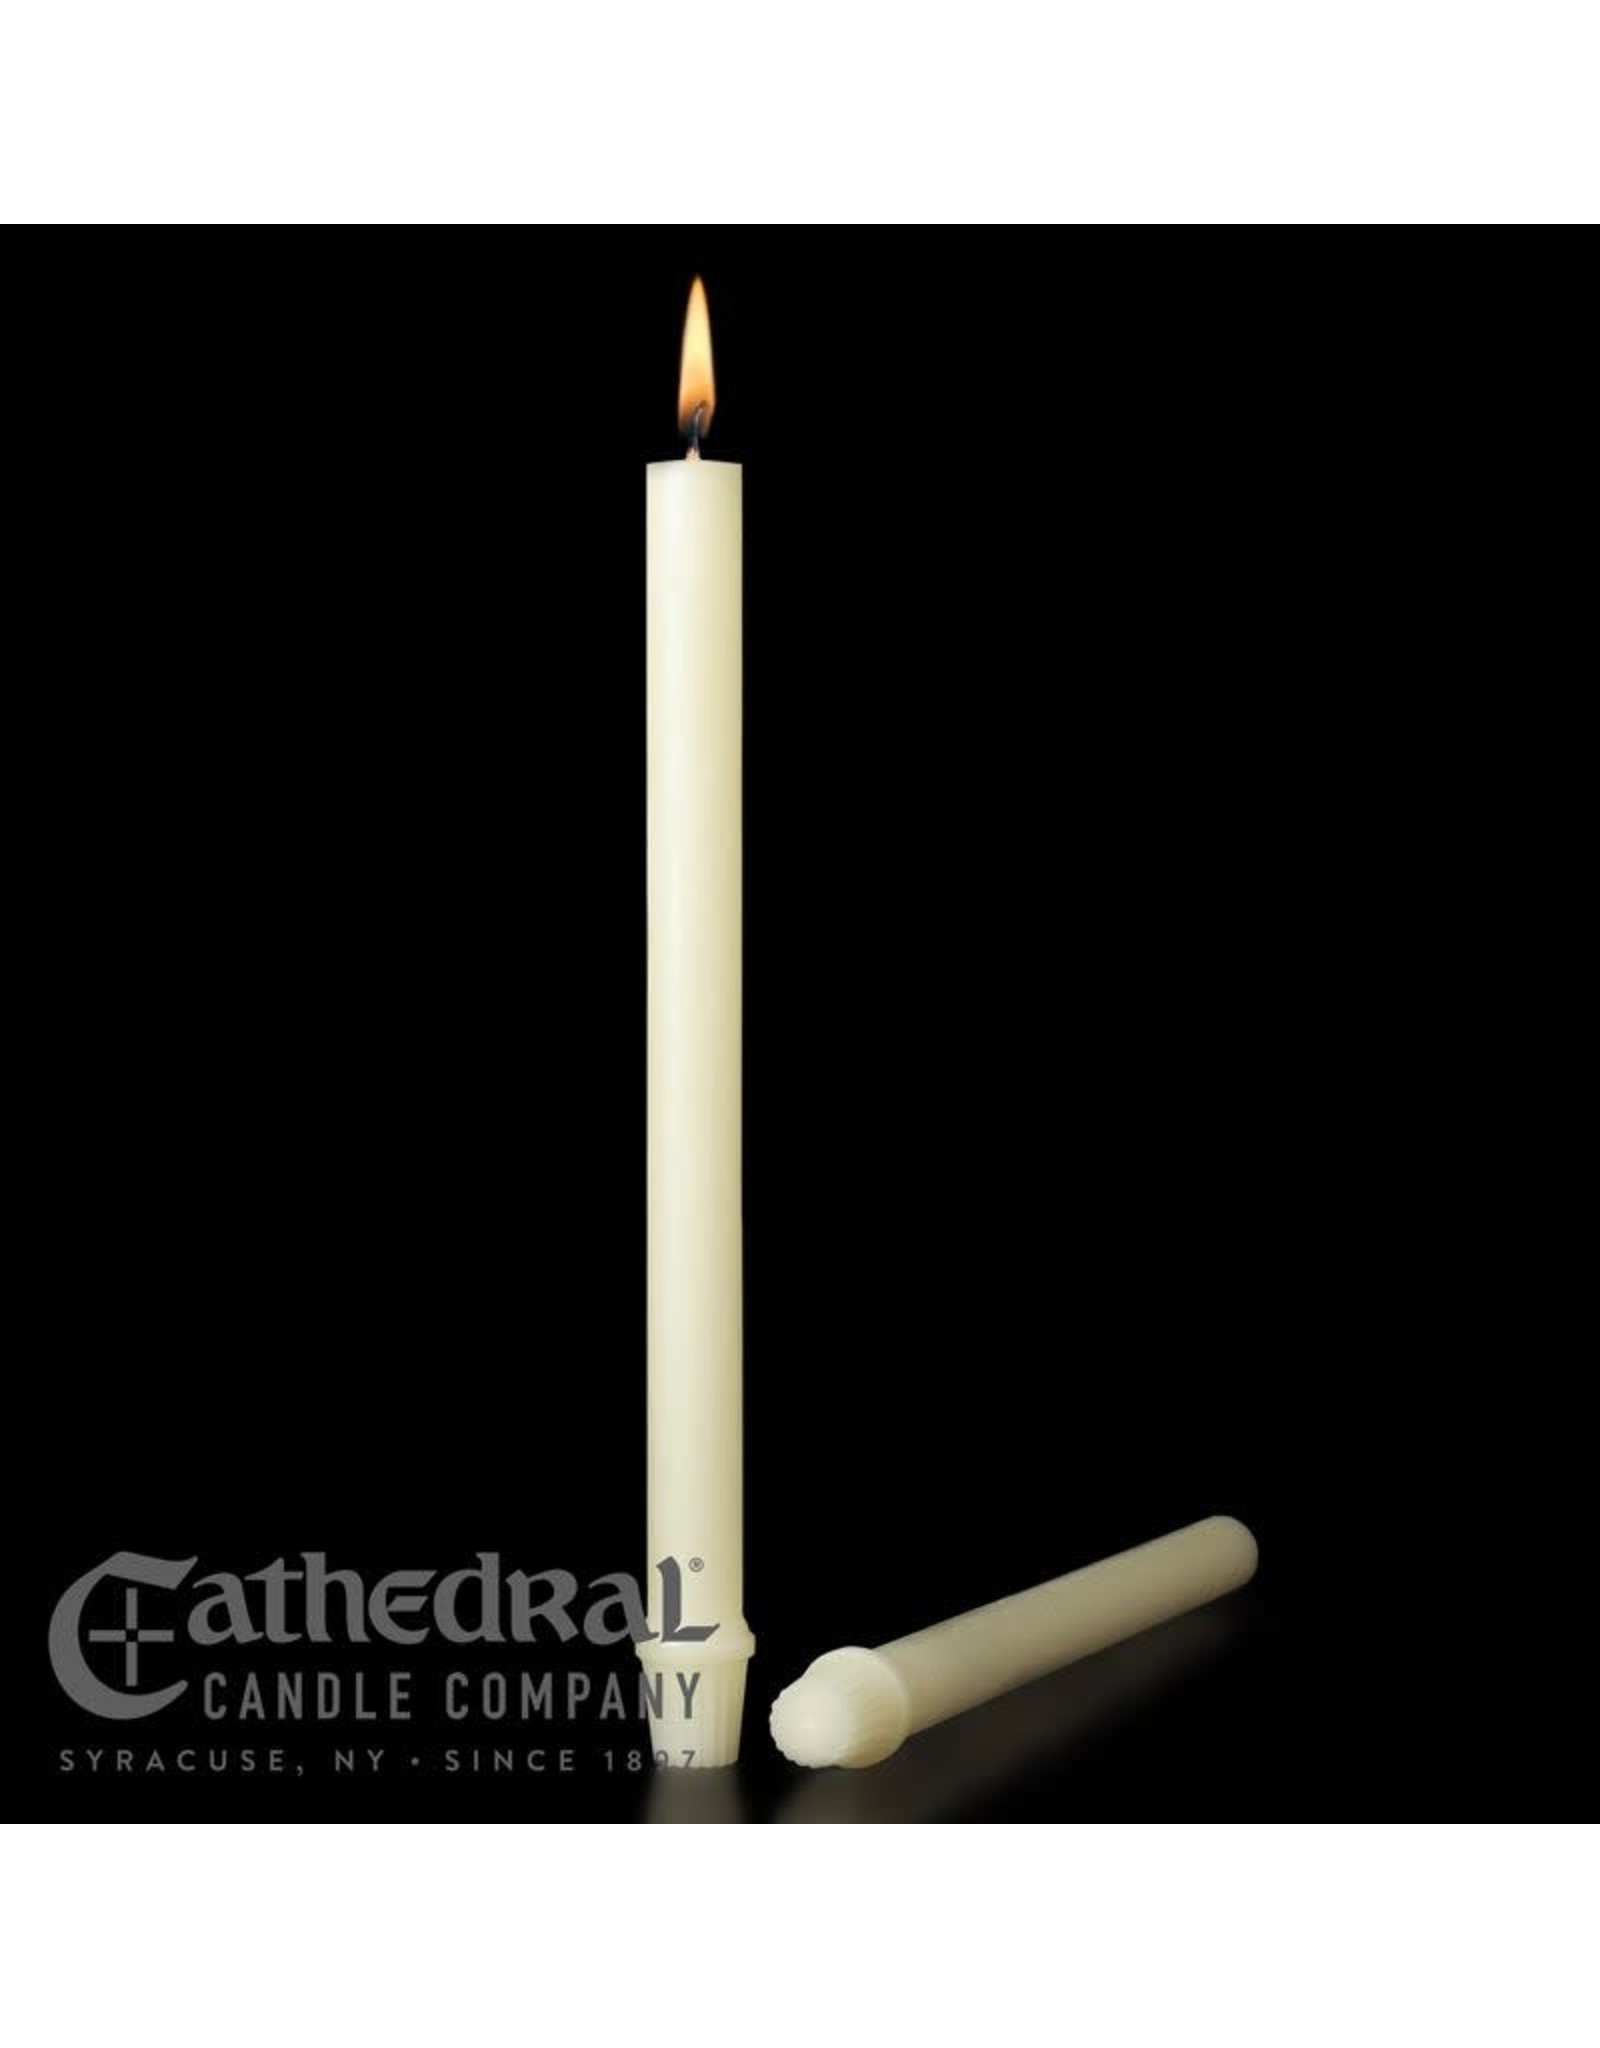 Cathedral Candle 51% Beeswax Altar Candles 1-1/16"x16-3/4" SFE (12)